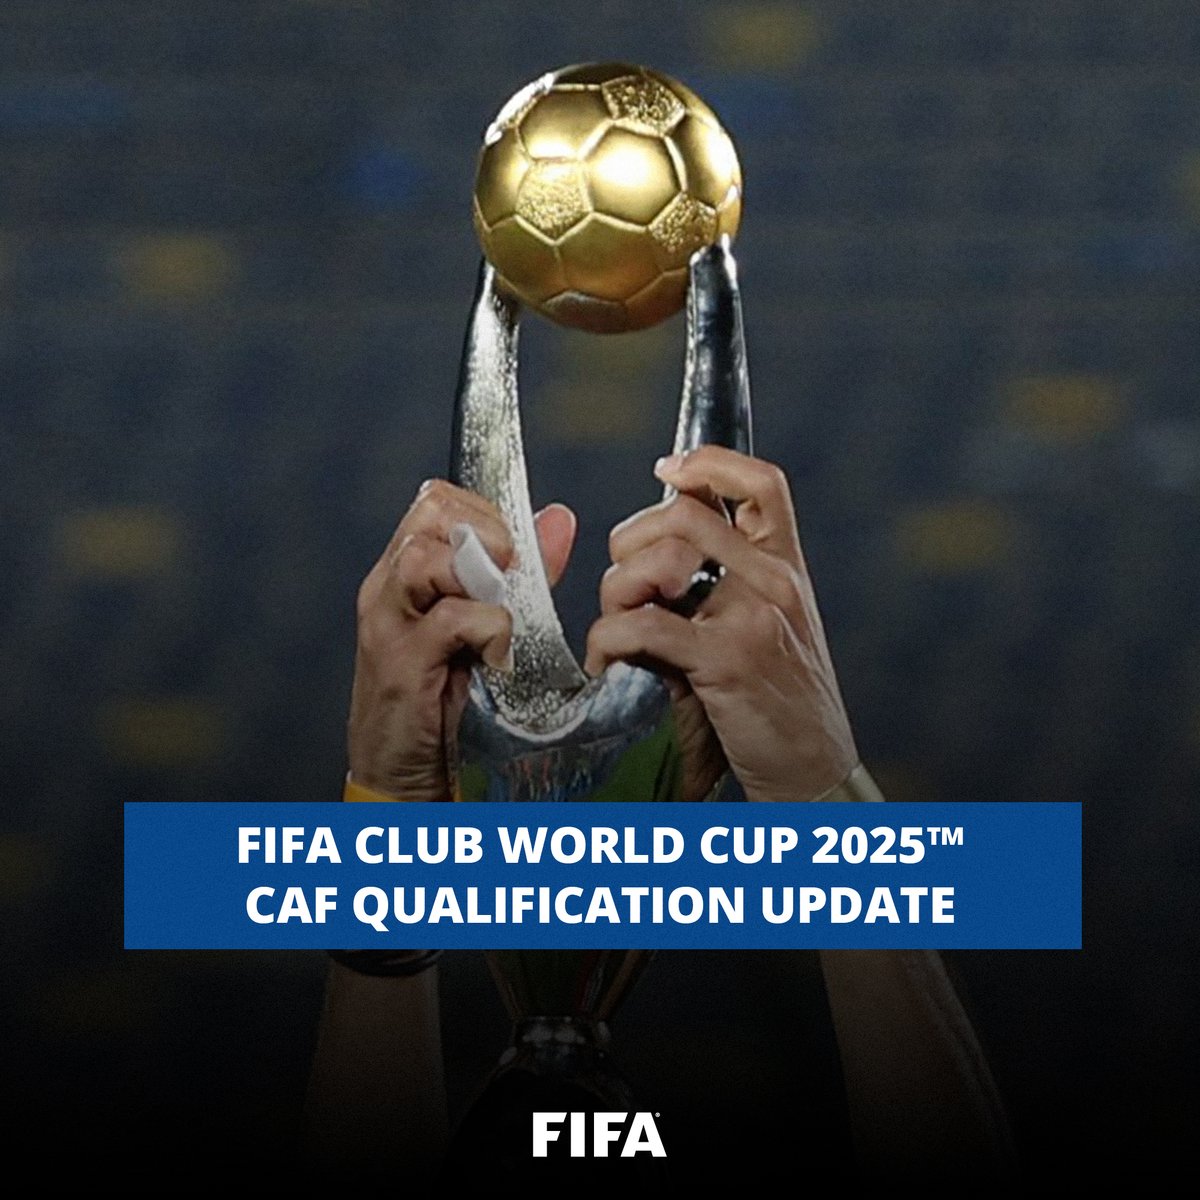 ❓ @ESTuniscom ❓ @Masandawana ❓ @TPMazembe Three African clubs are in contention to join @AlAhly and @WACofficiel at the FIFA Club World Cup 2025. Two spots for African teams remain up for grabs. Find out how clubs could qualify today.